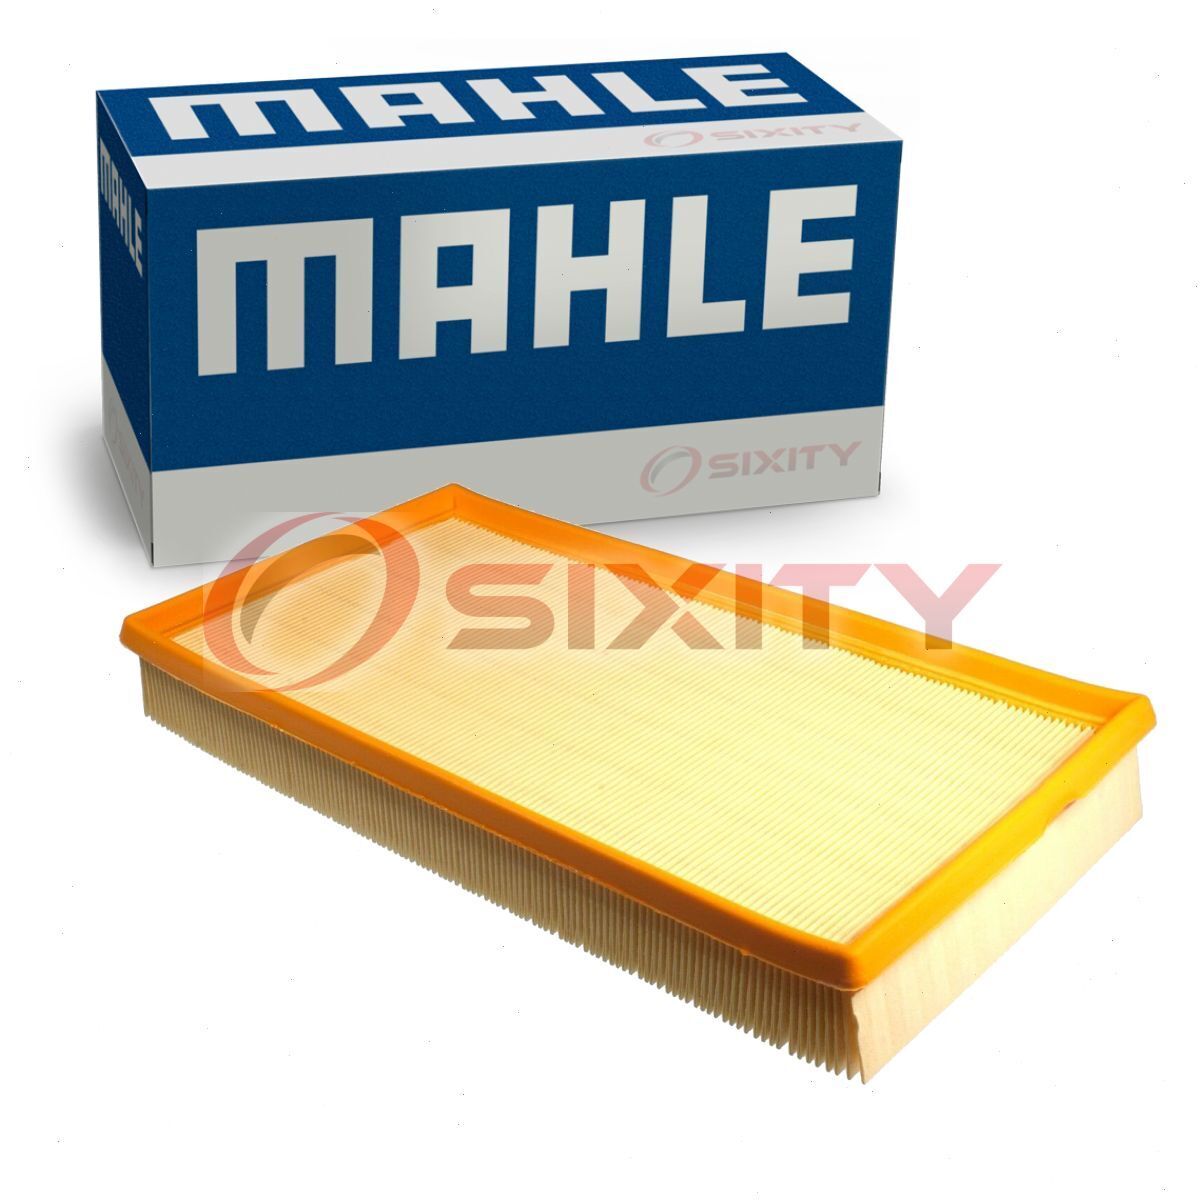 MAHLE LX 781 Air Filter for PA10298 C3479 AF1124 42052 042-1652 004 094 16 lx